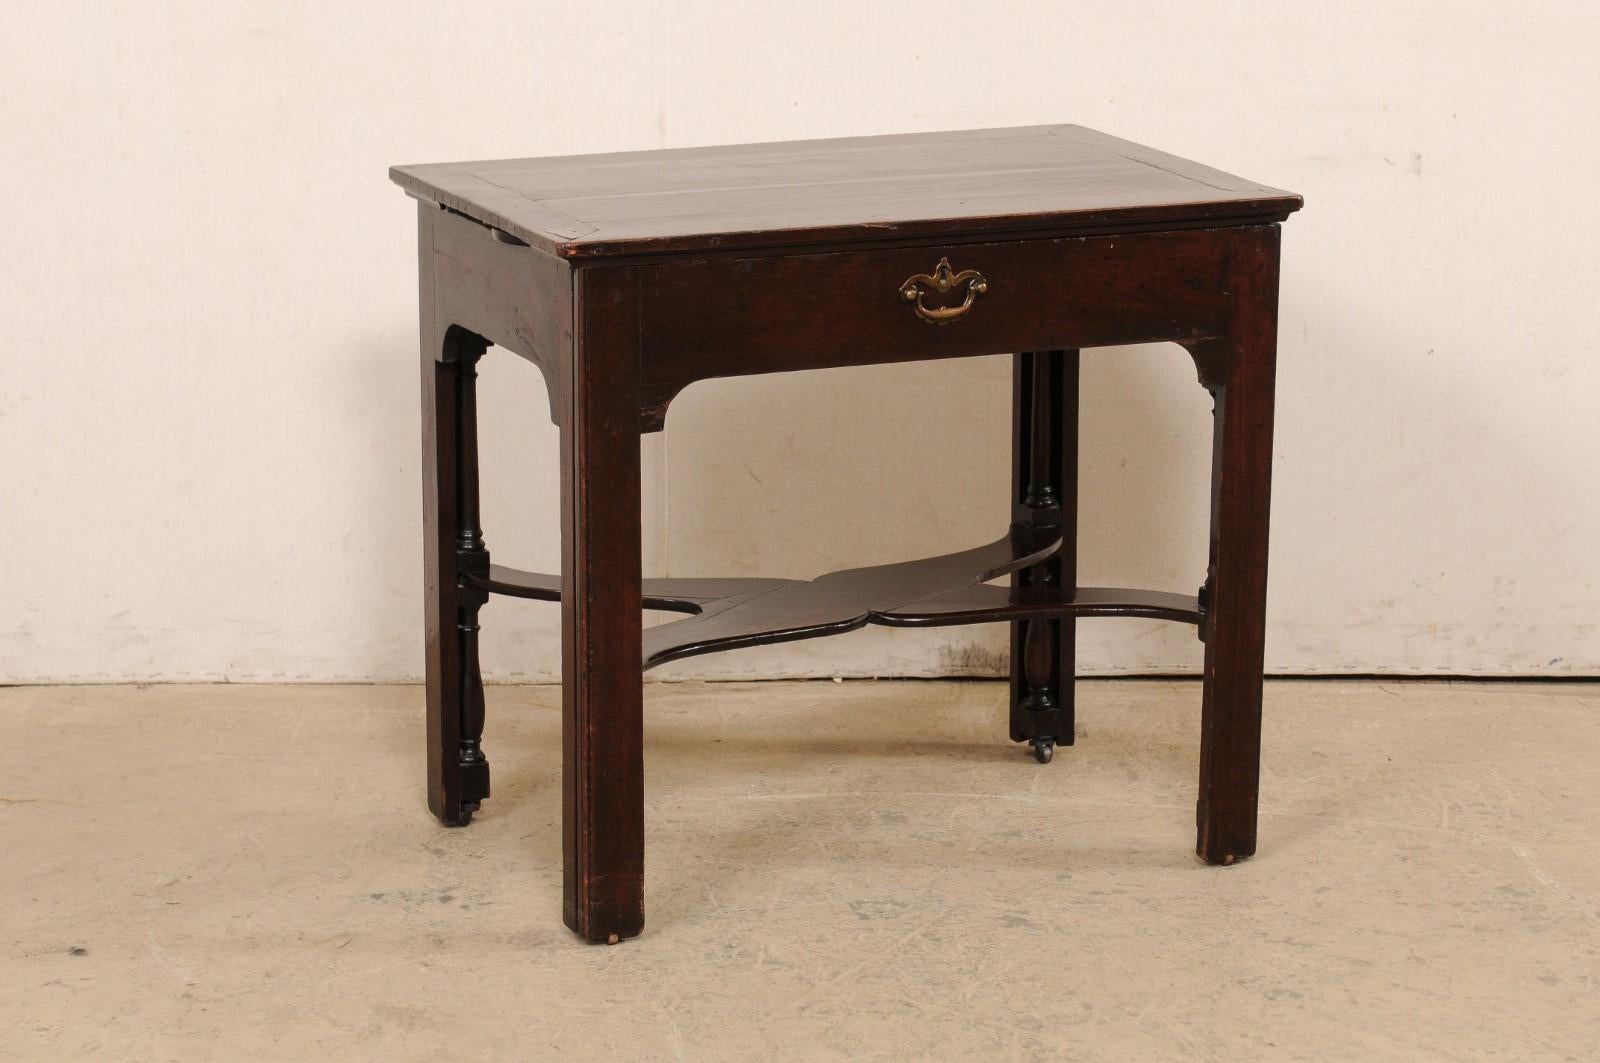 An English expandable architect's table with candle stands from the 18th century. This antique table from England would have originally been used as an architects work desk, complete with a pair of small shelves that pull out from either side of